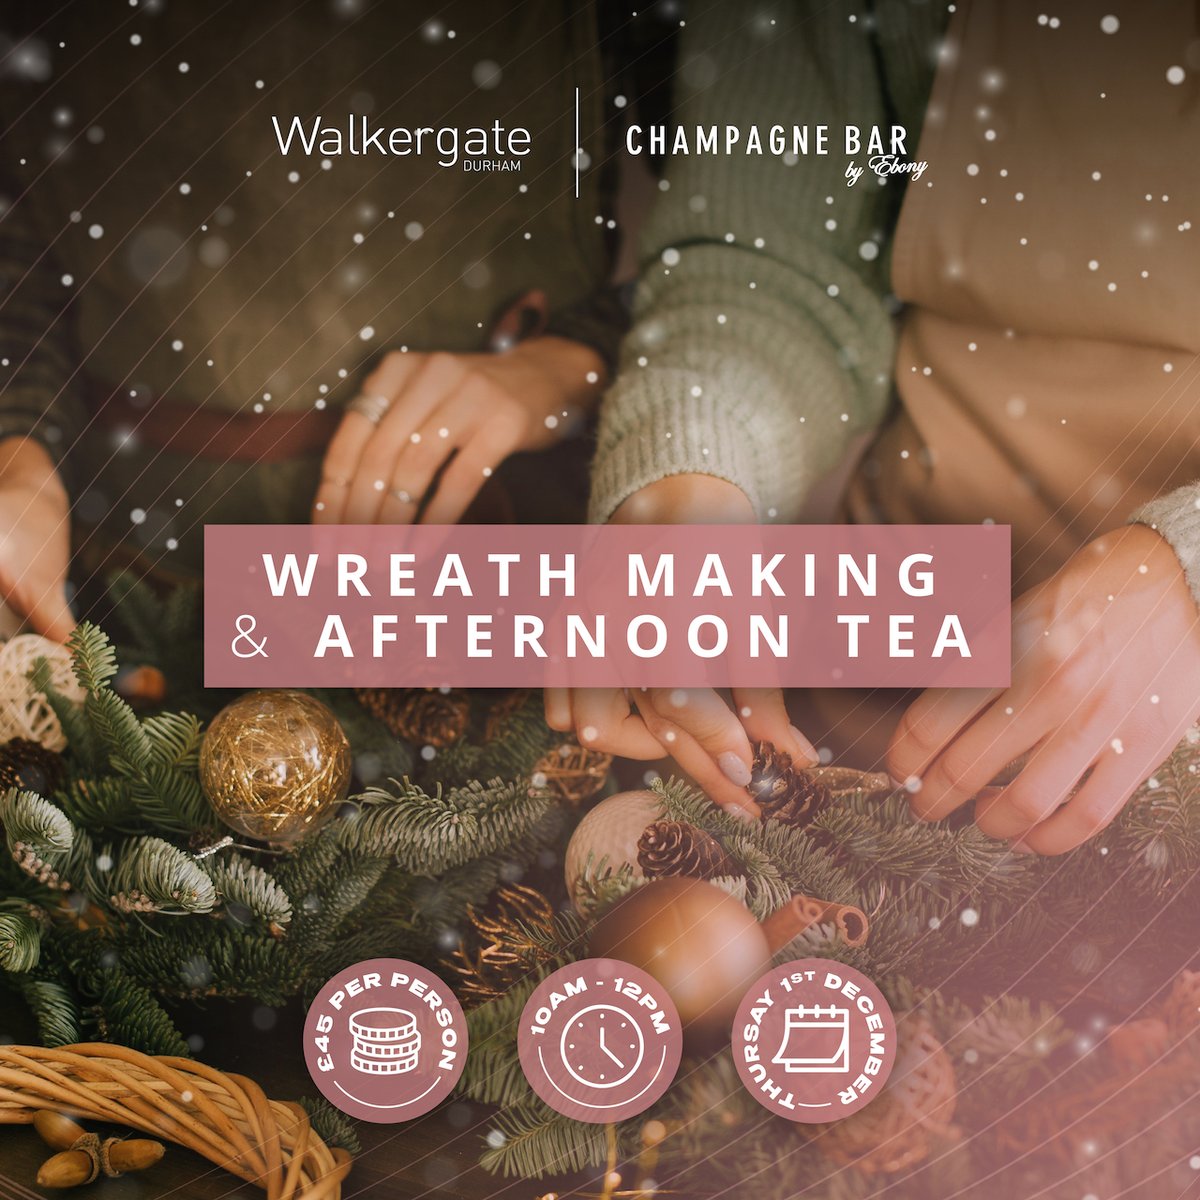 This December, visit @EnjoyWalkergate and inspire your #creativity with a luxury wreath-making workshop, followed by afternoon tea at @EbonyChampagne_! 🌿🎅🏻🥂 👉🏻 bit.ly/WreathMaking_a… #Durham #CountyDurham